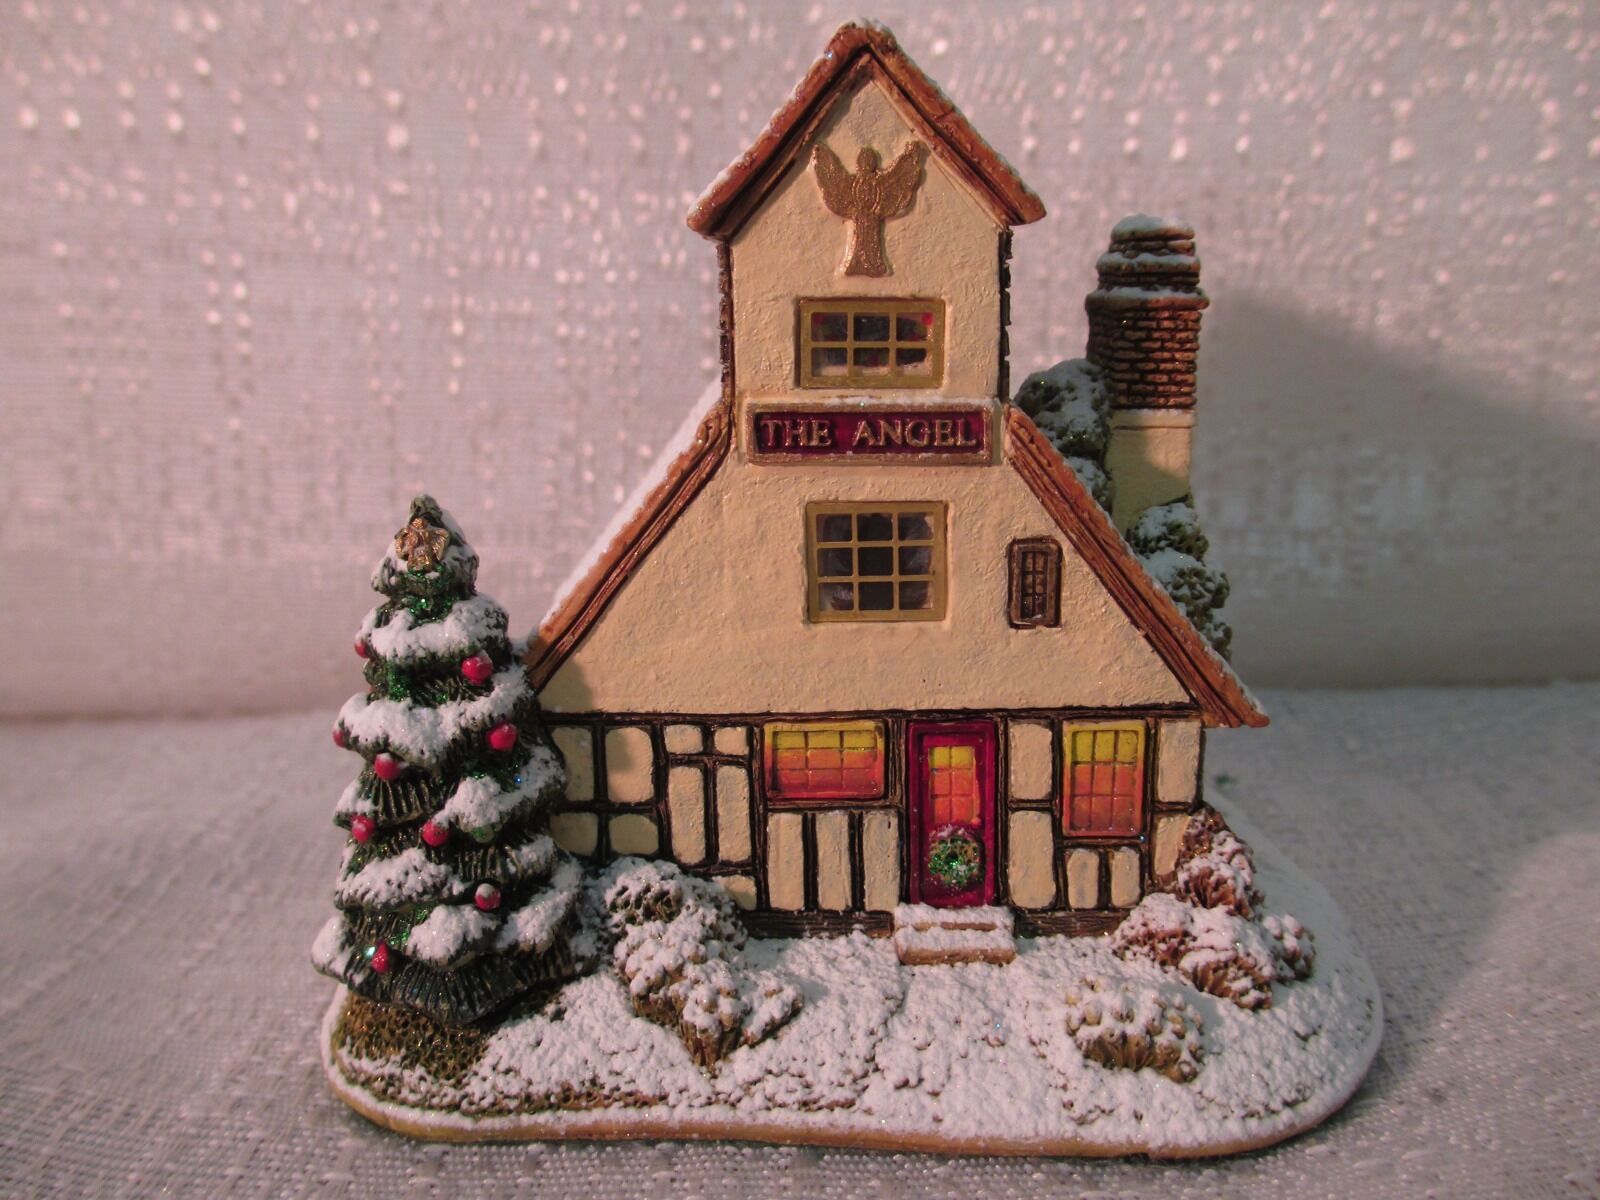 Lilliput Lane The Angel Inn Illuminated Cottages Collection Enesco 2012 L3460